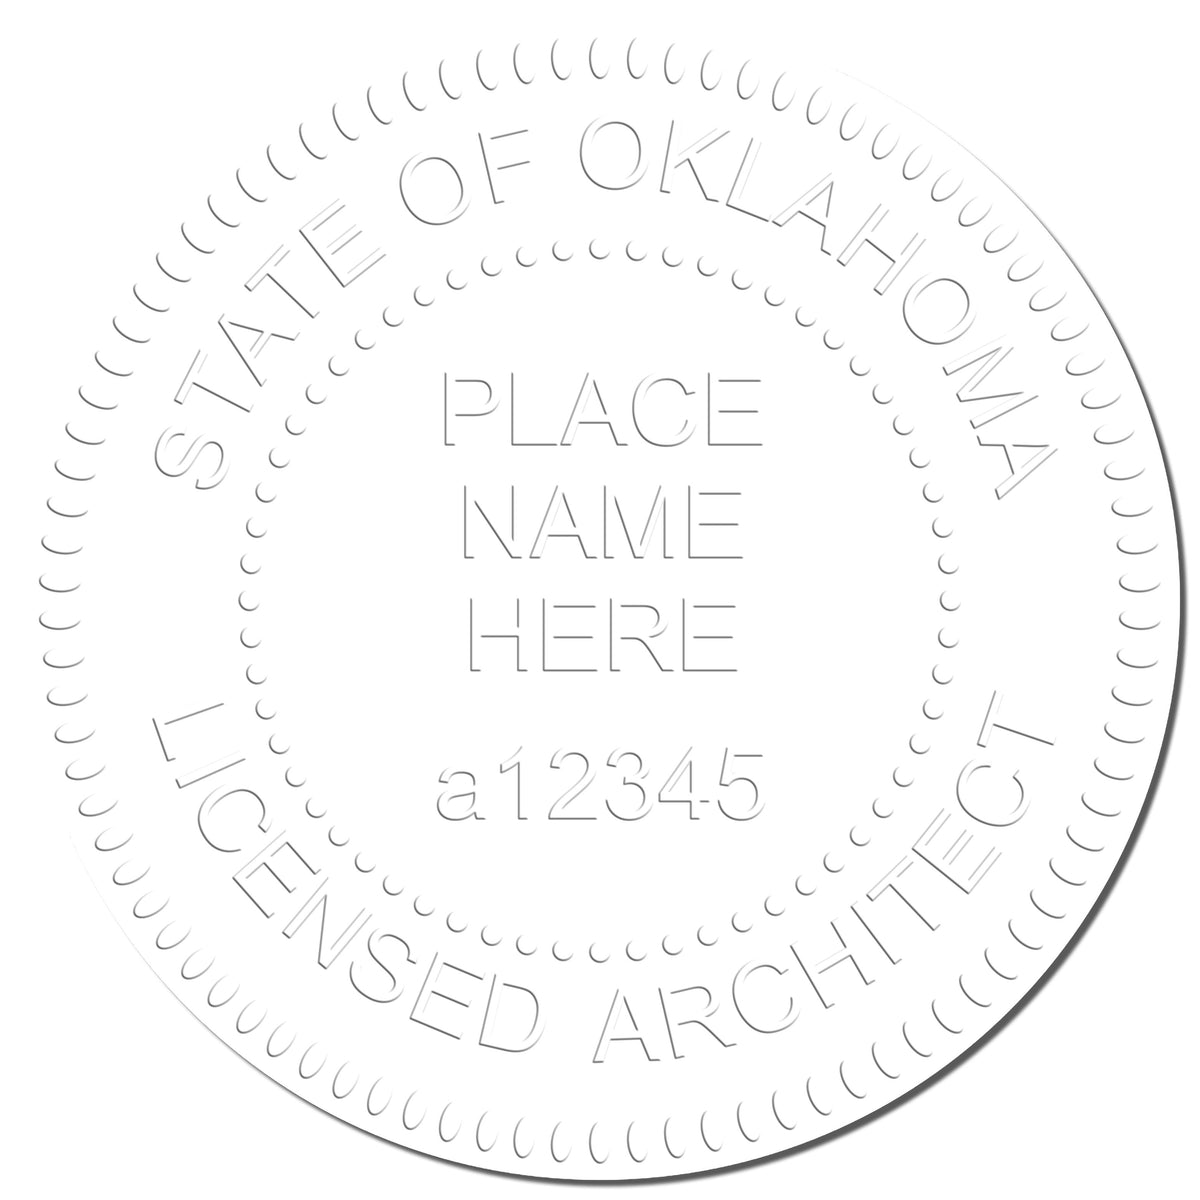 This paper is stamped with a sample imprint of the Hybrid Oklahoma Architect Seal, signifying its quality and reliability.